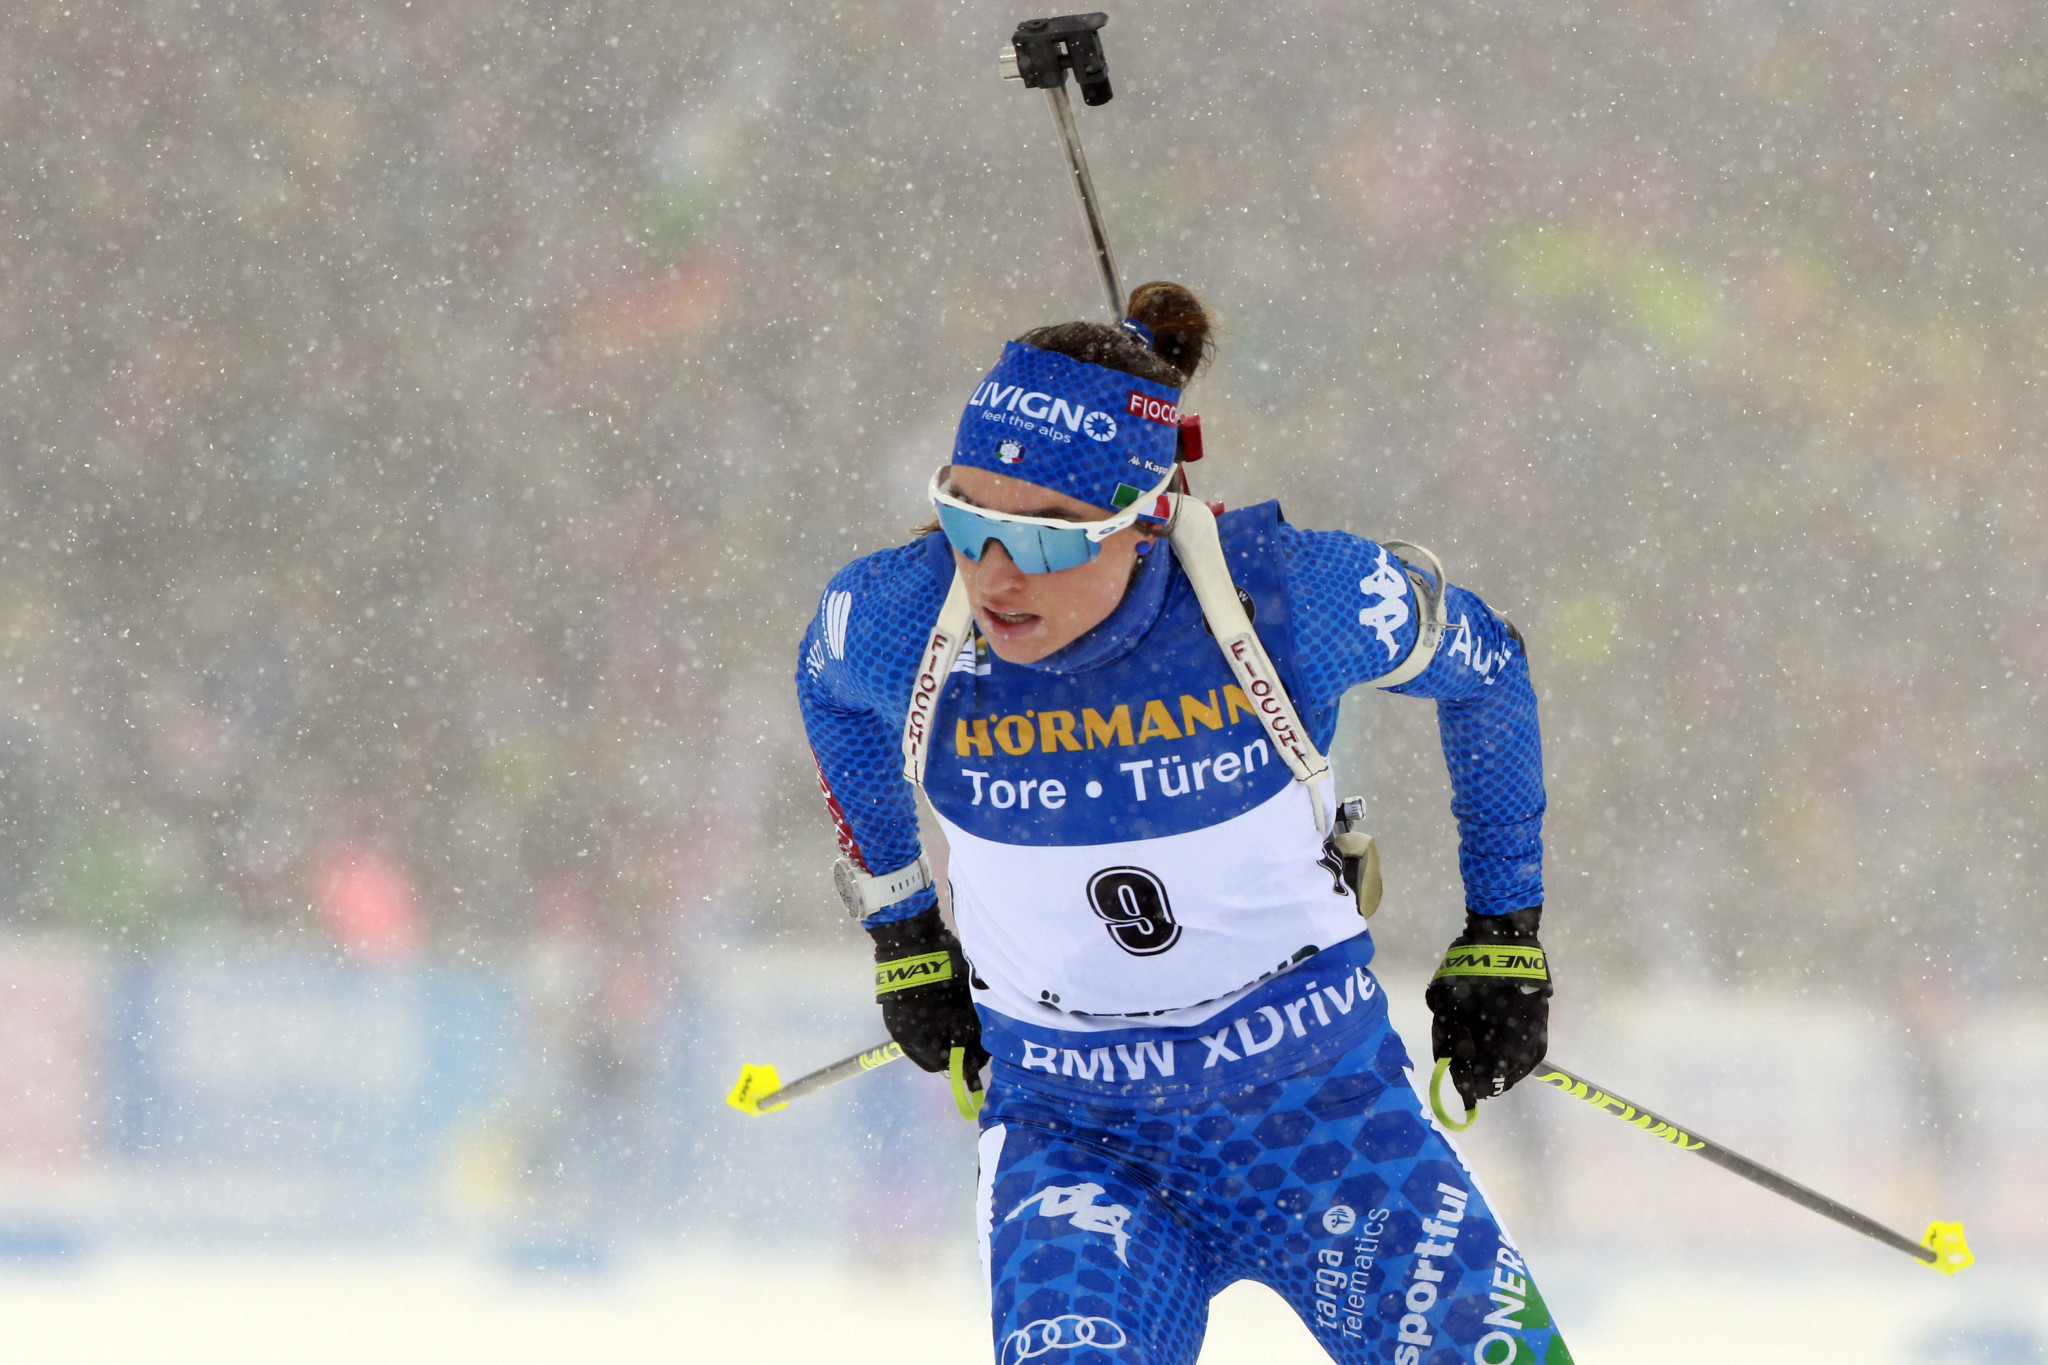 Women's overall title up for grabs with IBU World Cup season set to conclude in Oslo